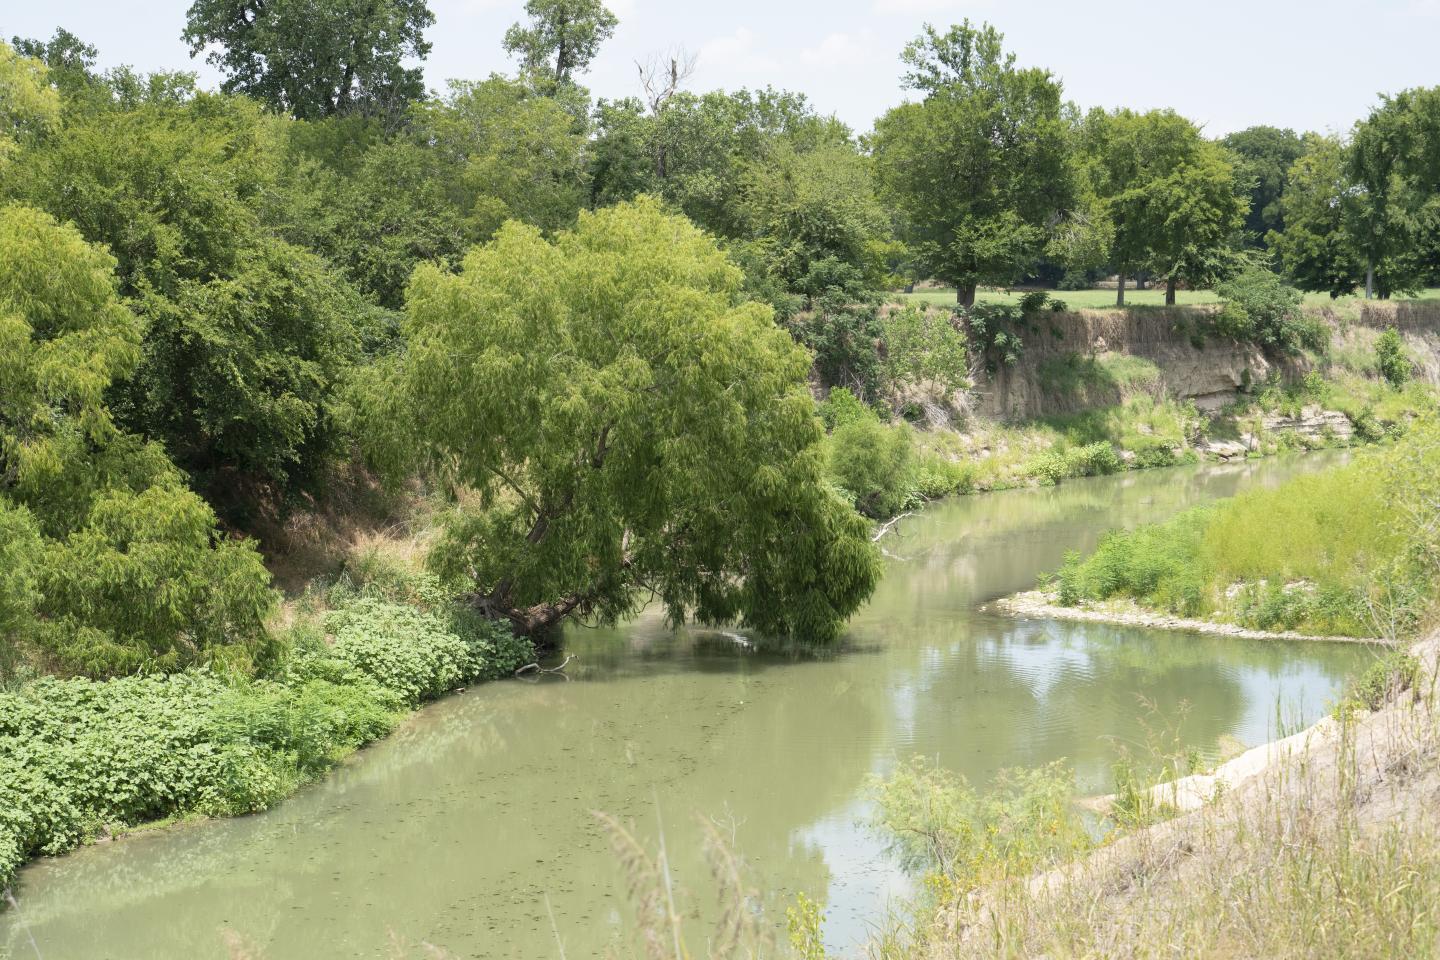 Segment of the Little River on Dice Grove Farms. Little River is a river in the Brazos River watershed. It is formed by the confluence of the Leon River and the Lampasas River near Little River, Texas.